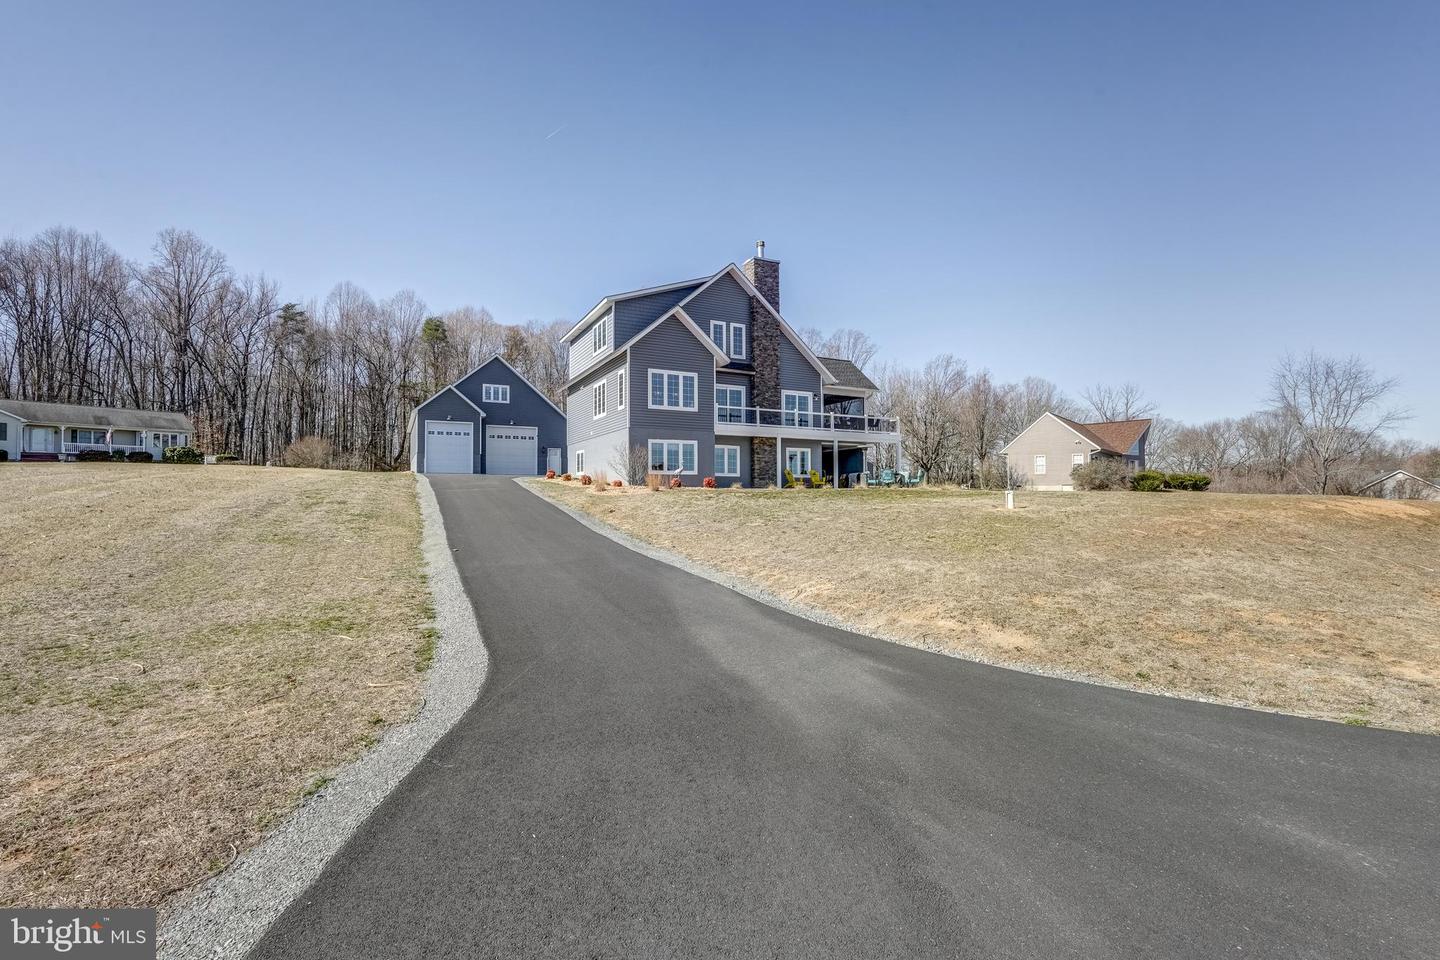 475 SECLUSION SHORES DR, MINERAL, Virginia 23117, 5 Bedrooms Bedrooms, 15 Rooms Rooms,3 BathroomsBathrooms,Residential,For sale,475 SECLUSION SHORES DR,VALA2005168 MLS # VALA2005168